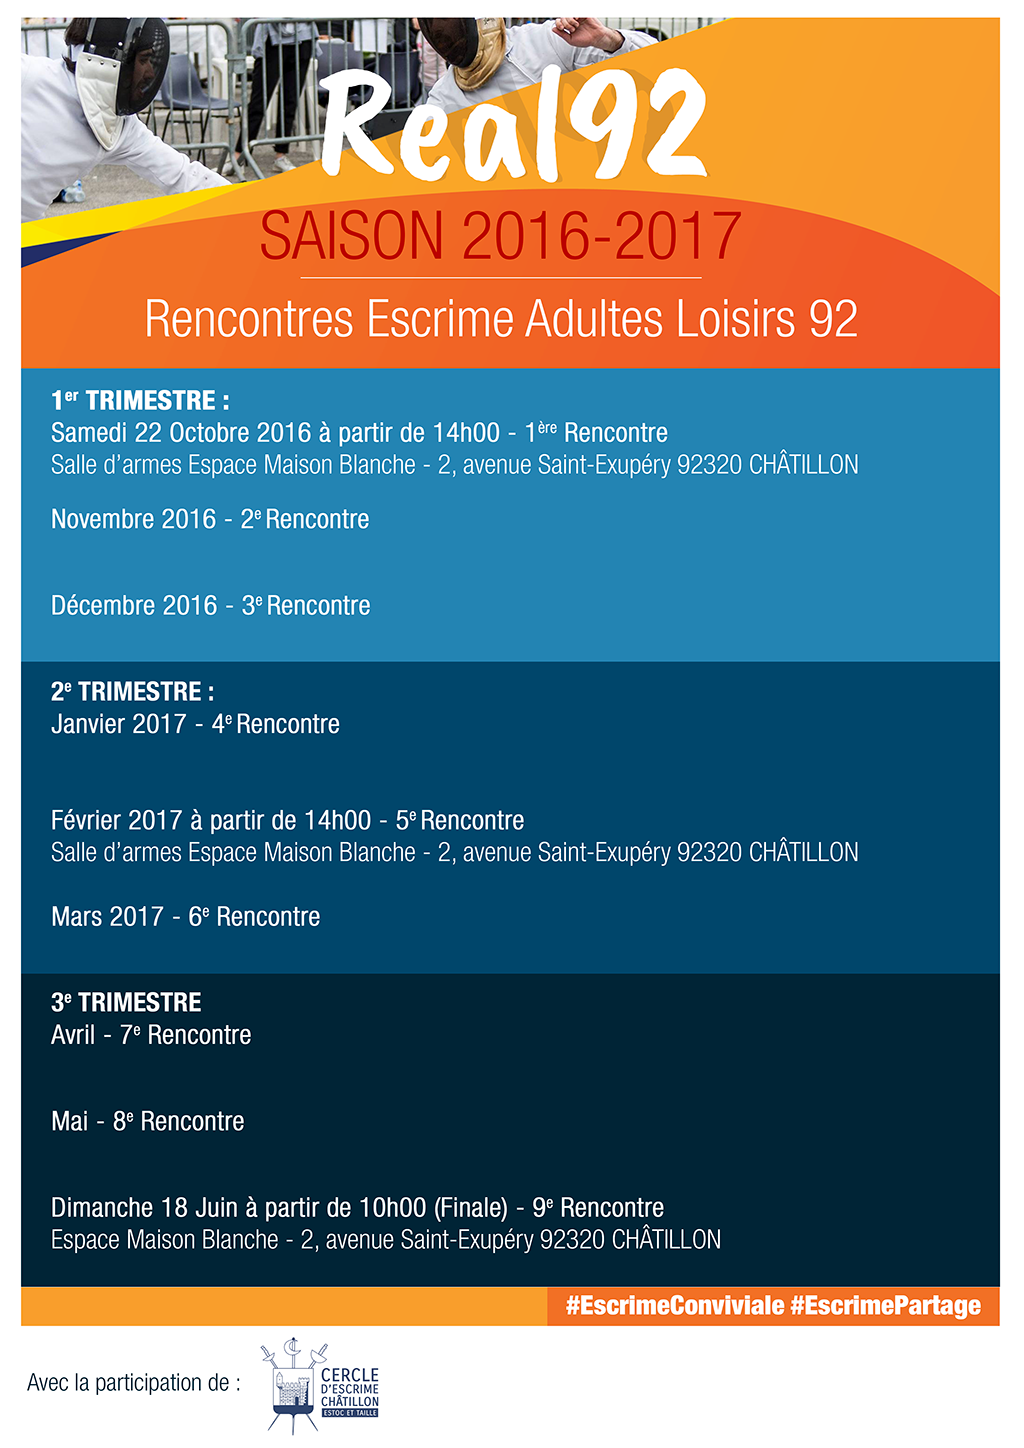 calendrier-real92-2016-20170.png